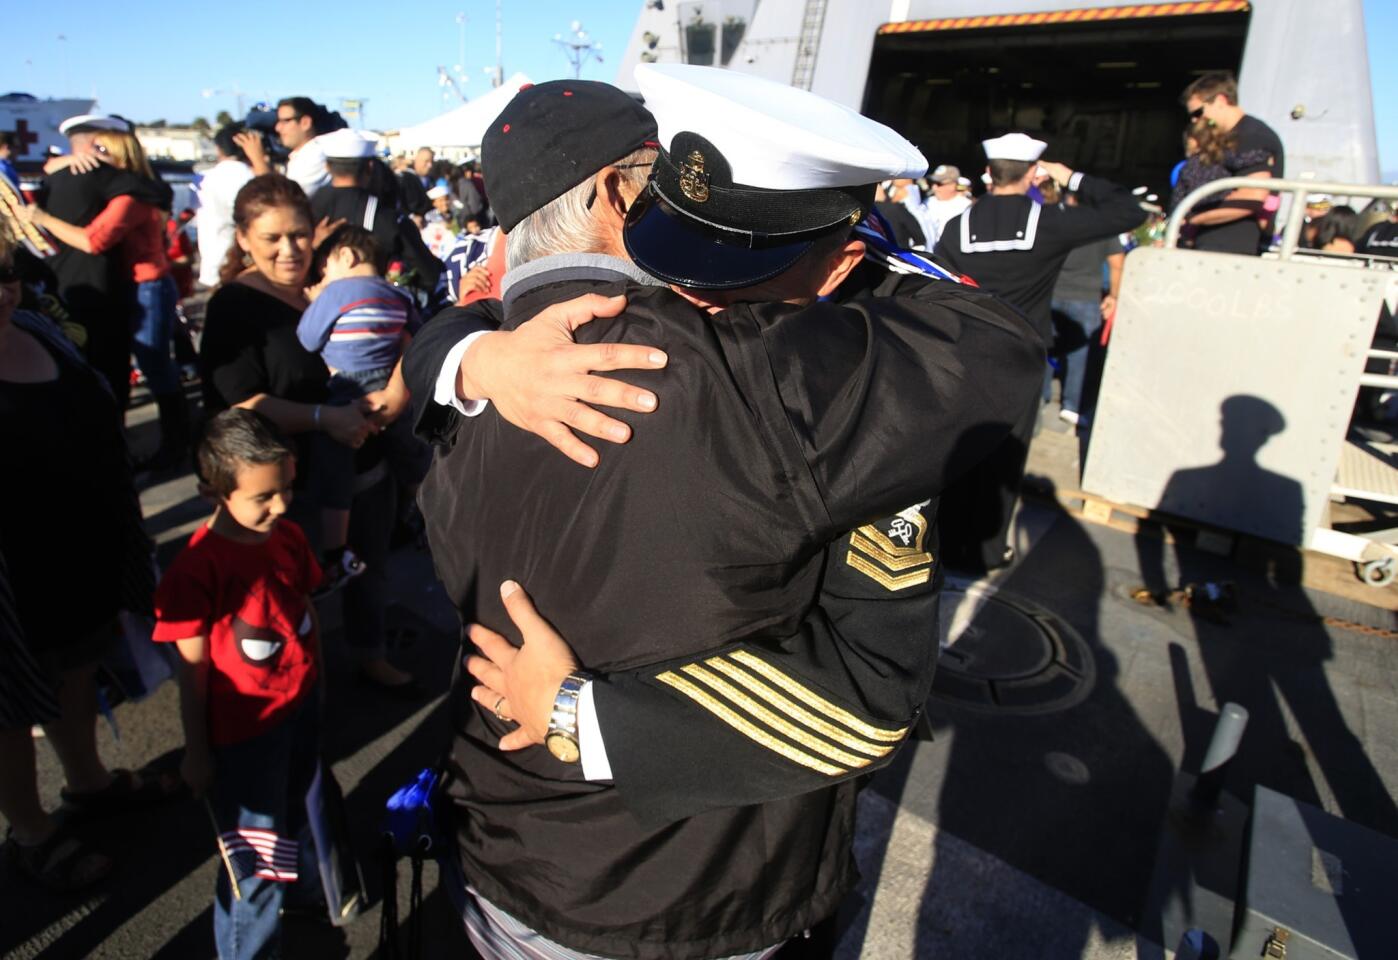 The Navy ship Freedom returns, bringing sailors home in time for Christmas.